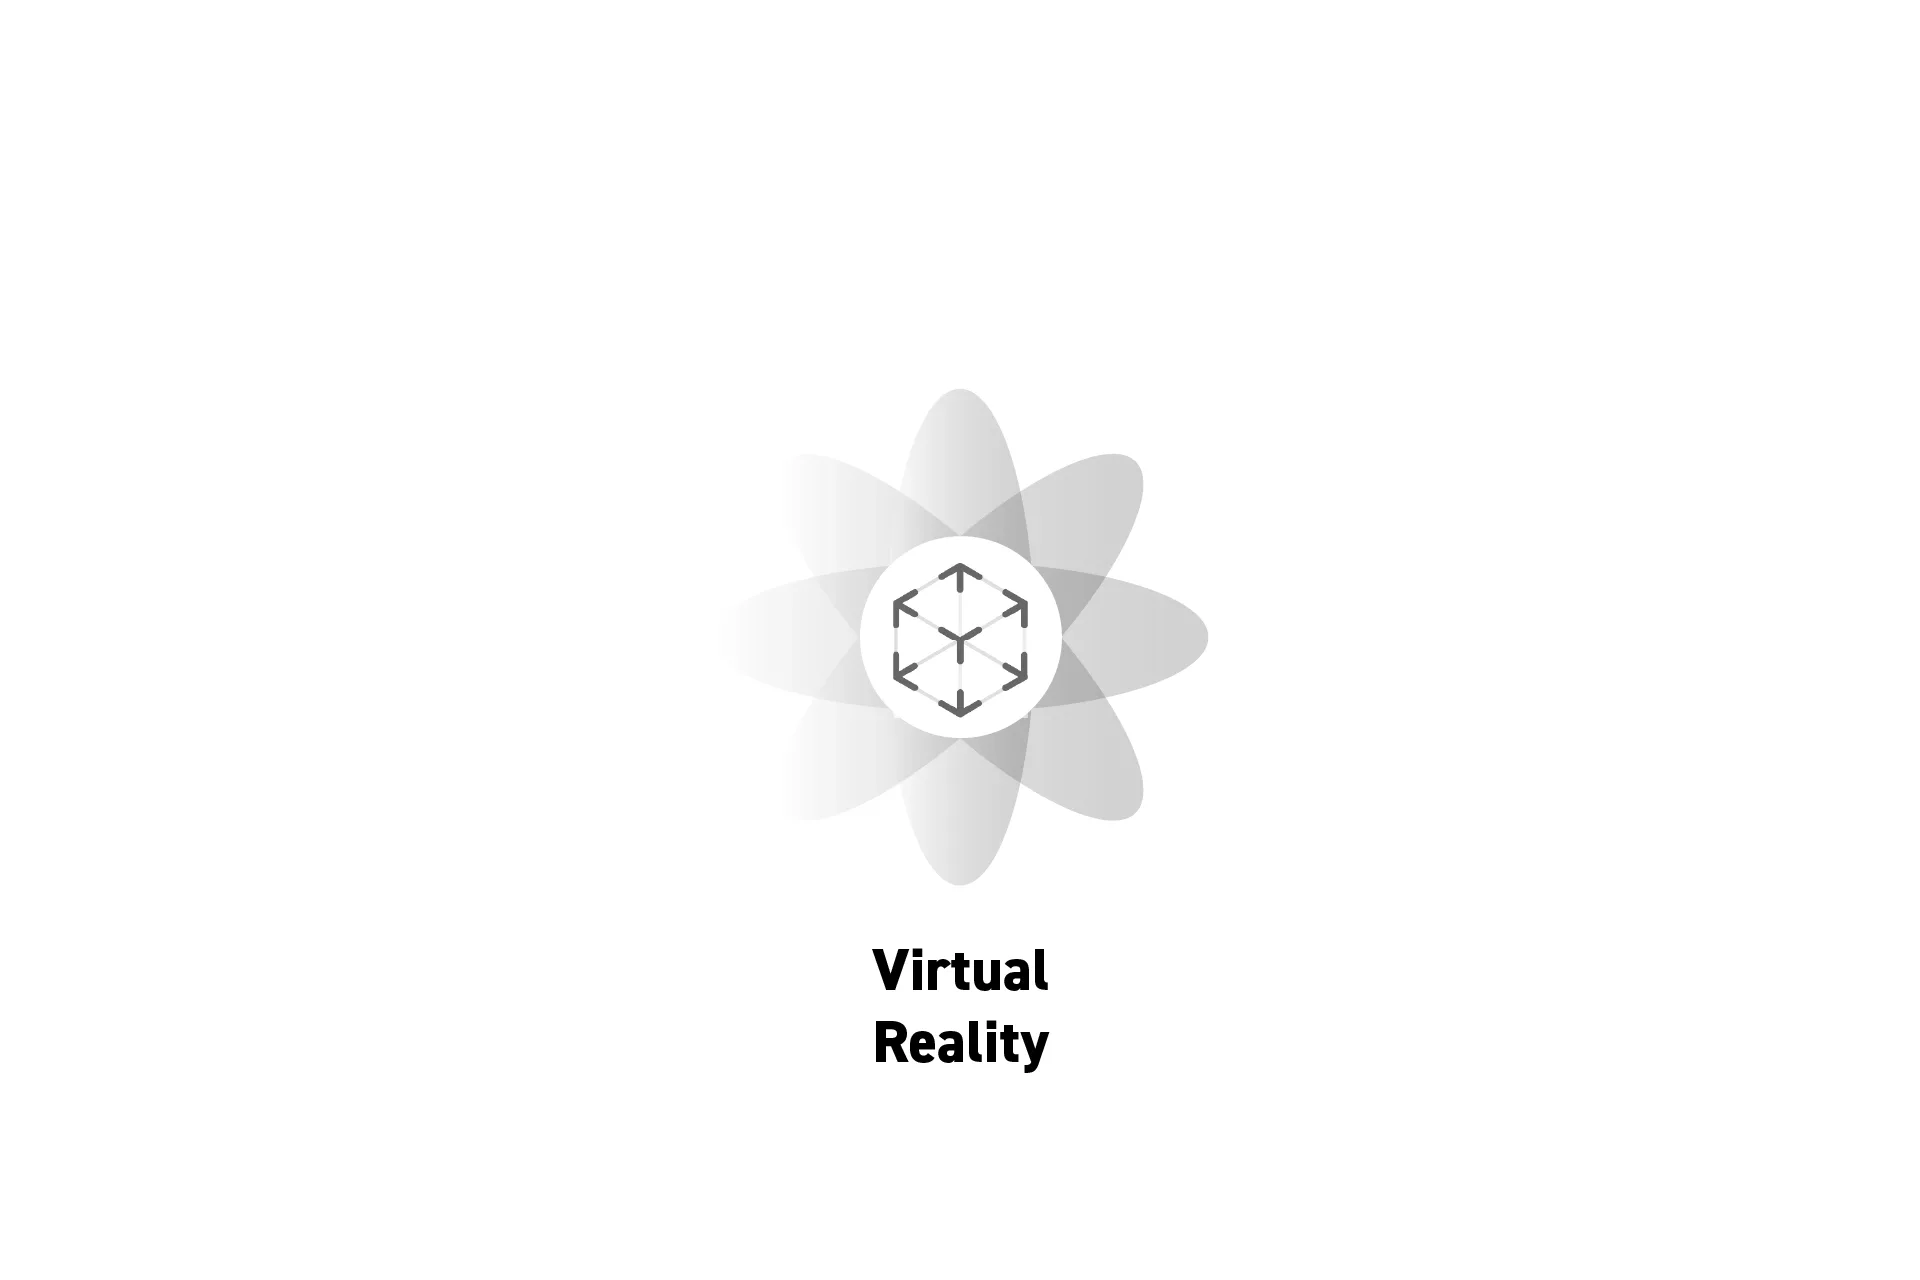 A flower that represents spatial computing with the text "Virtual Reality" beneath it.